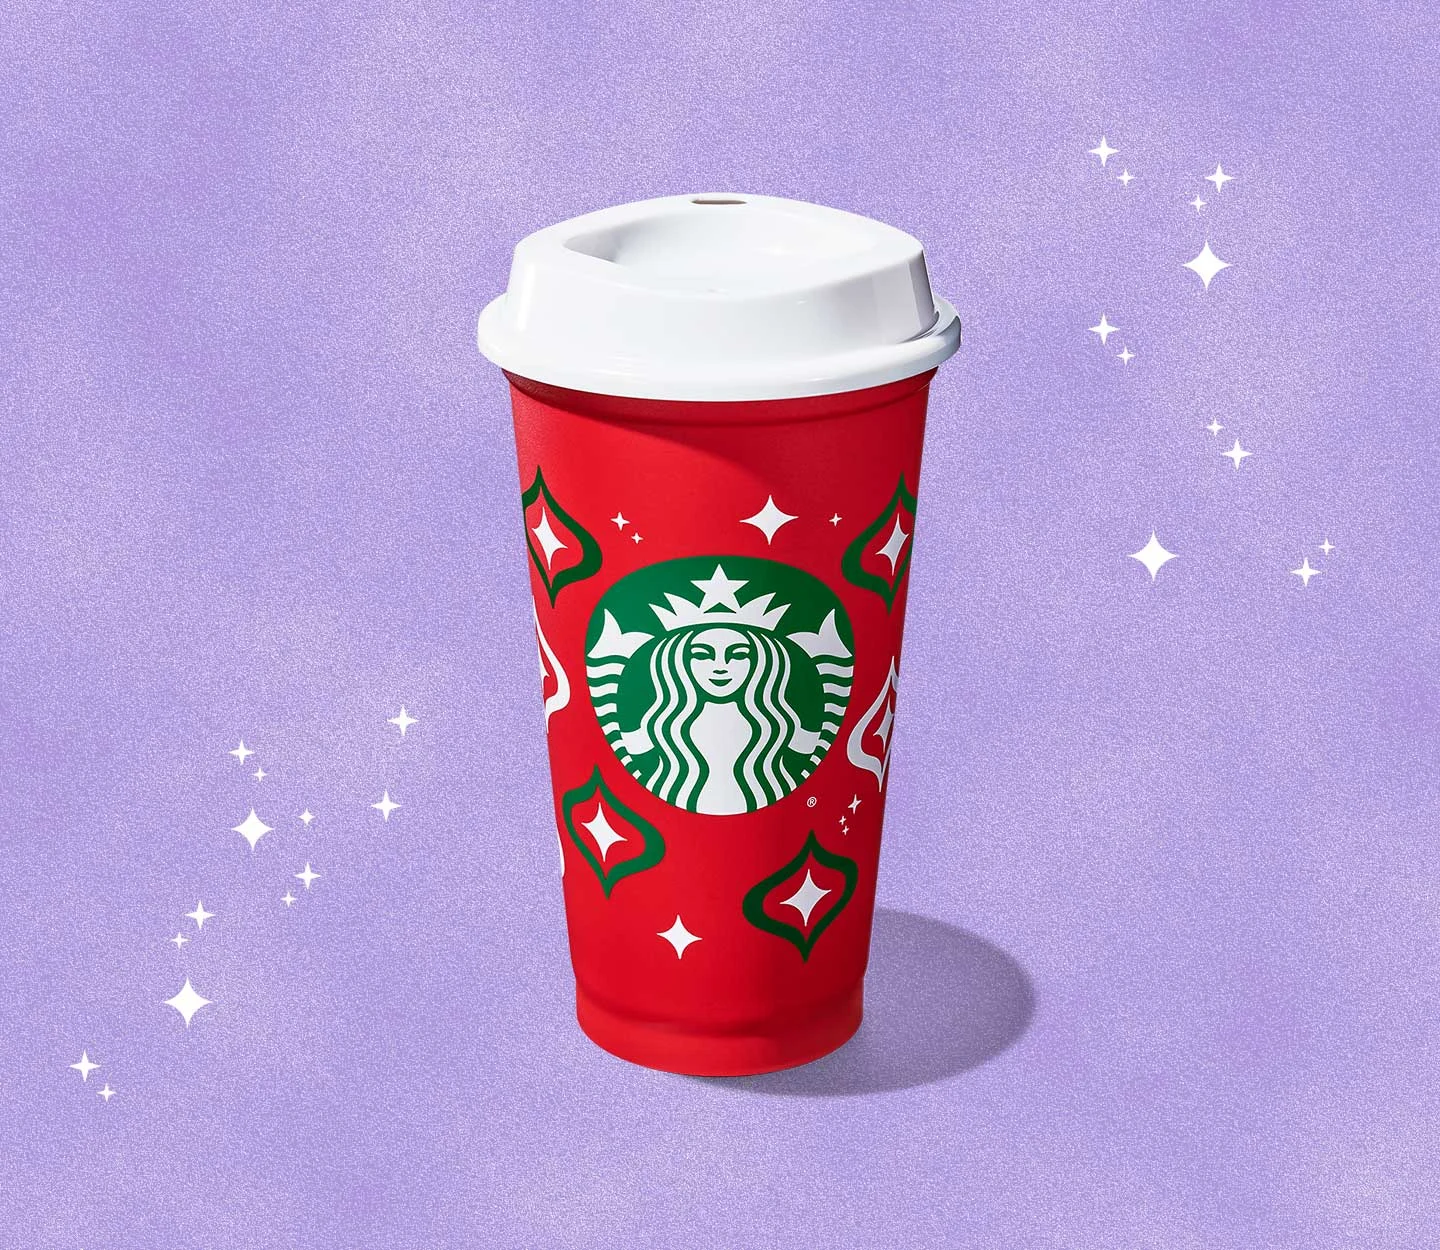 When Are Starbucks' Reusable Holiday Red Cups Coming Back in 2021